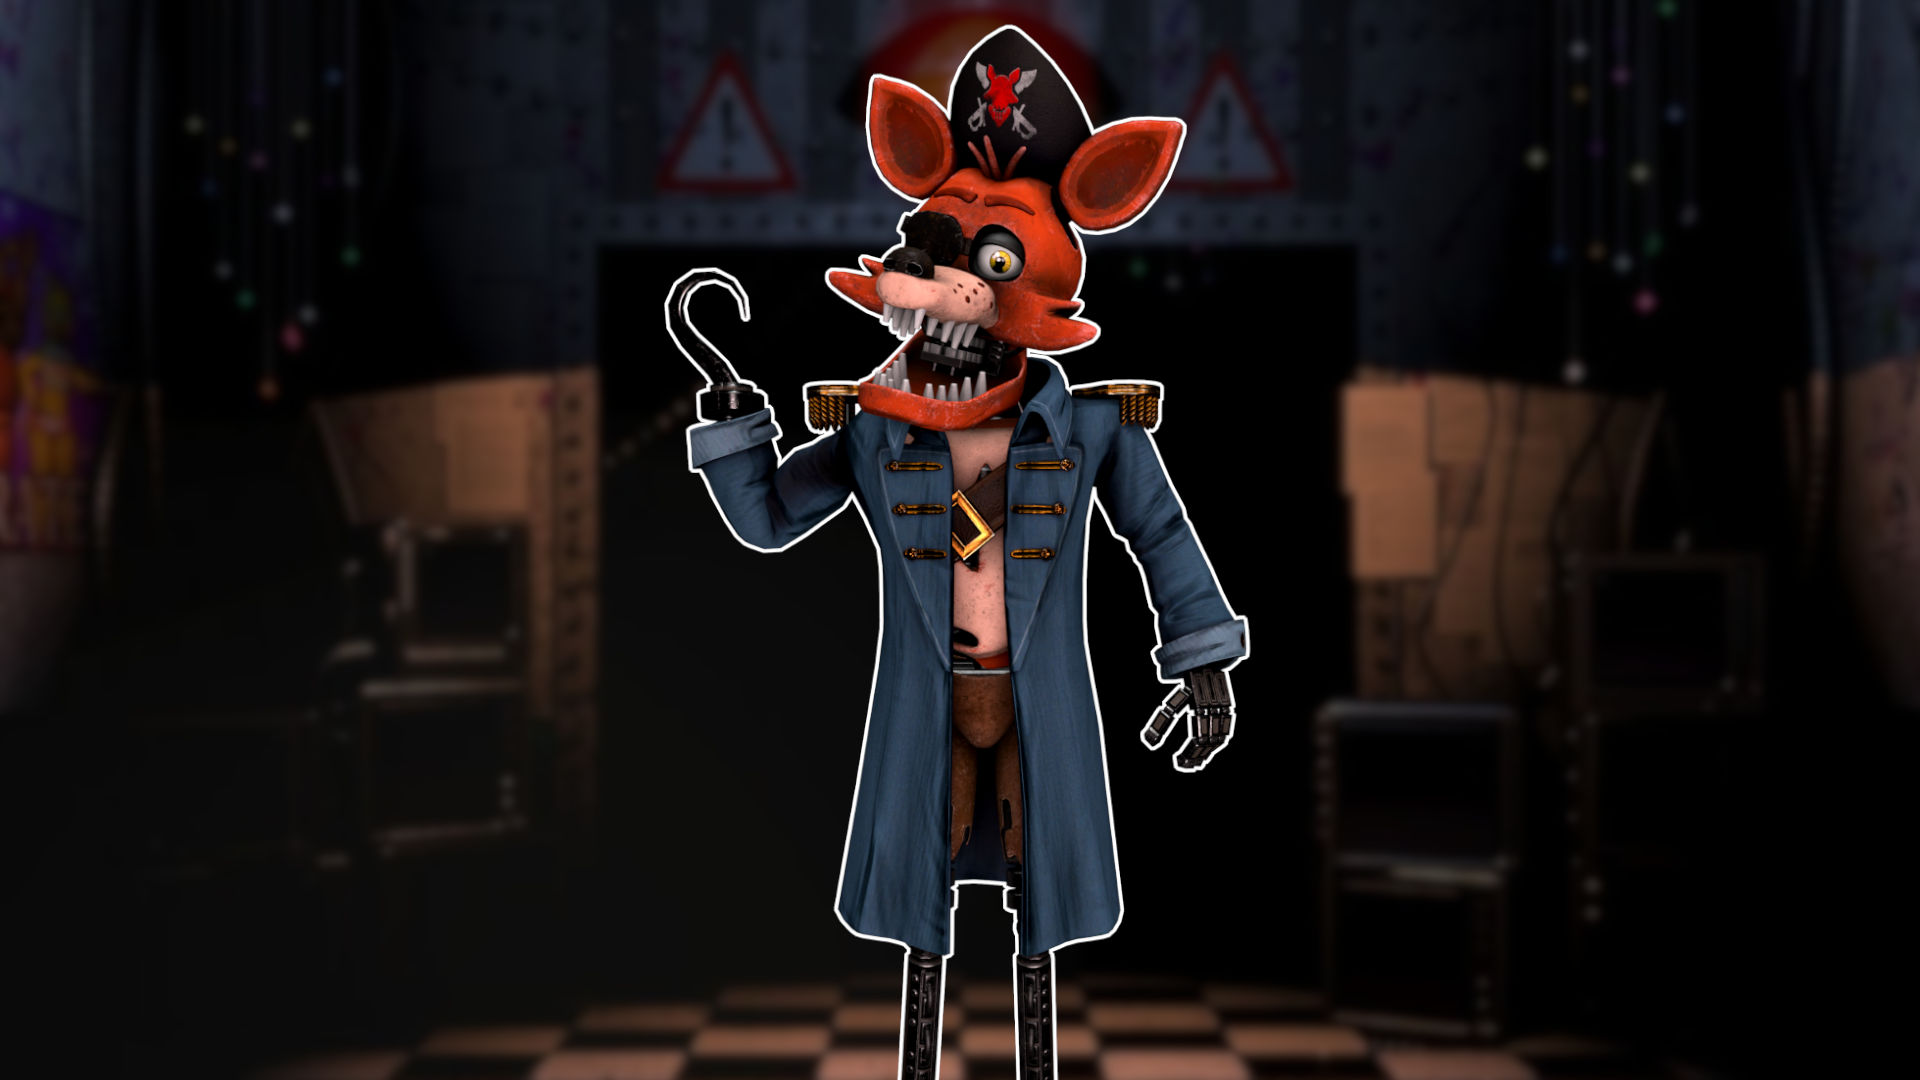 Which Fnaf characters is on your birthday---- Foxy! Finally not a